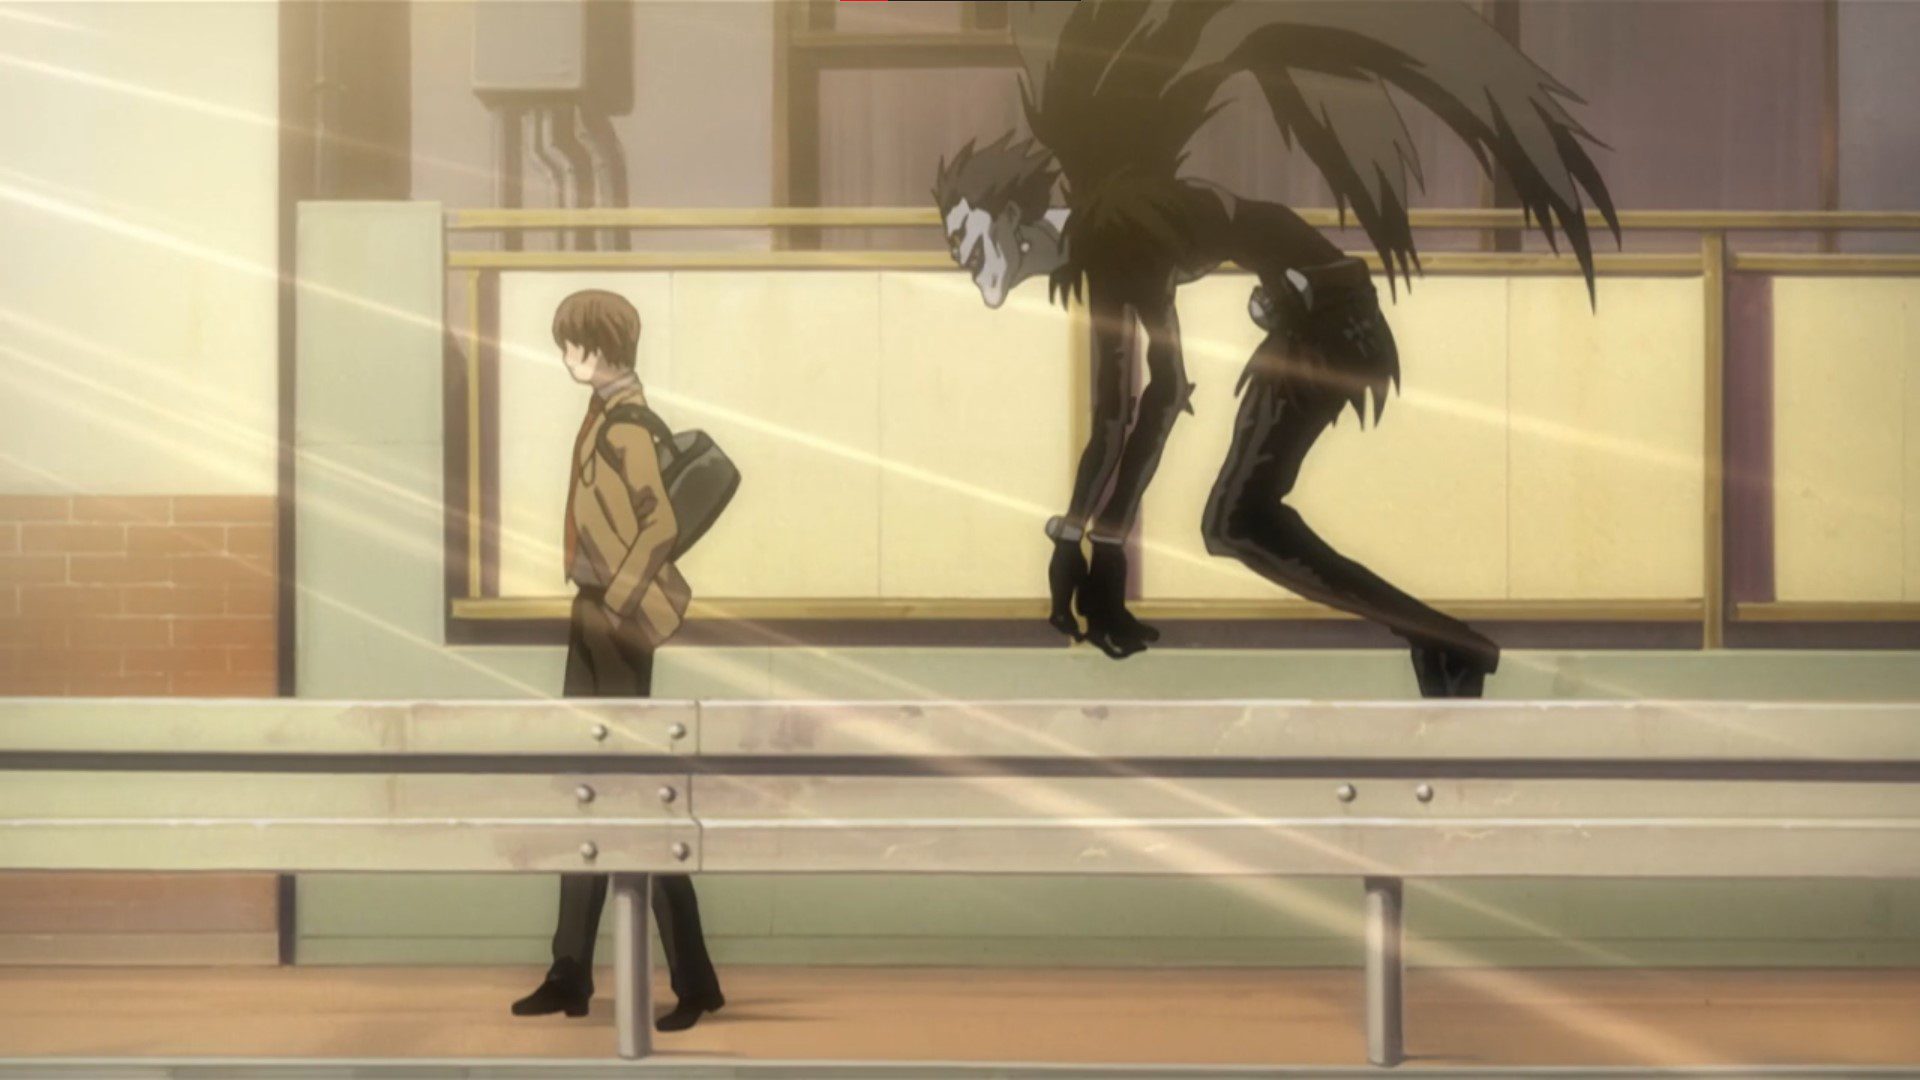 Did L Know Light Was Kira? Death Note Controversy Explained